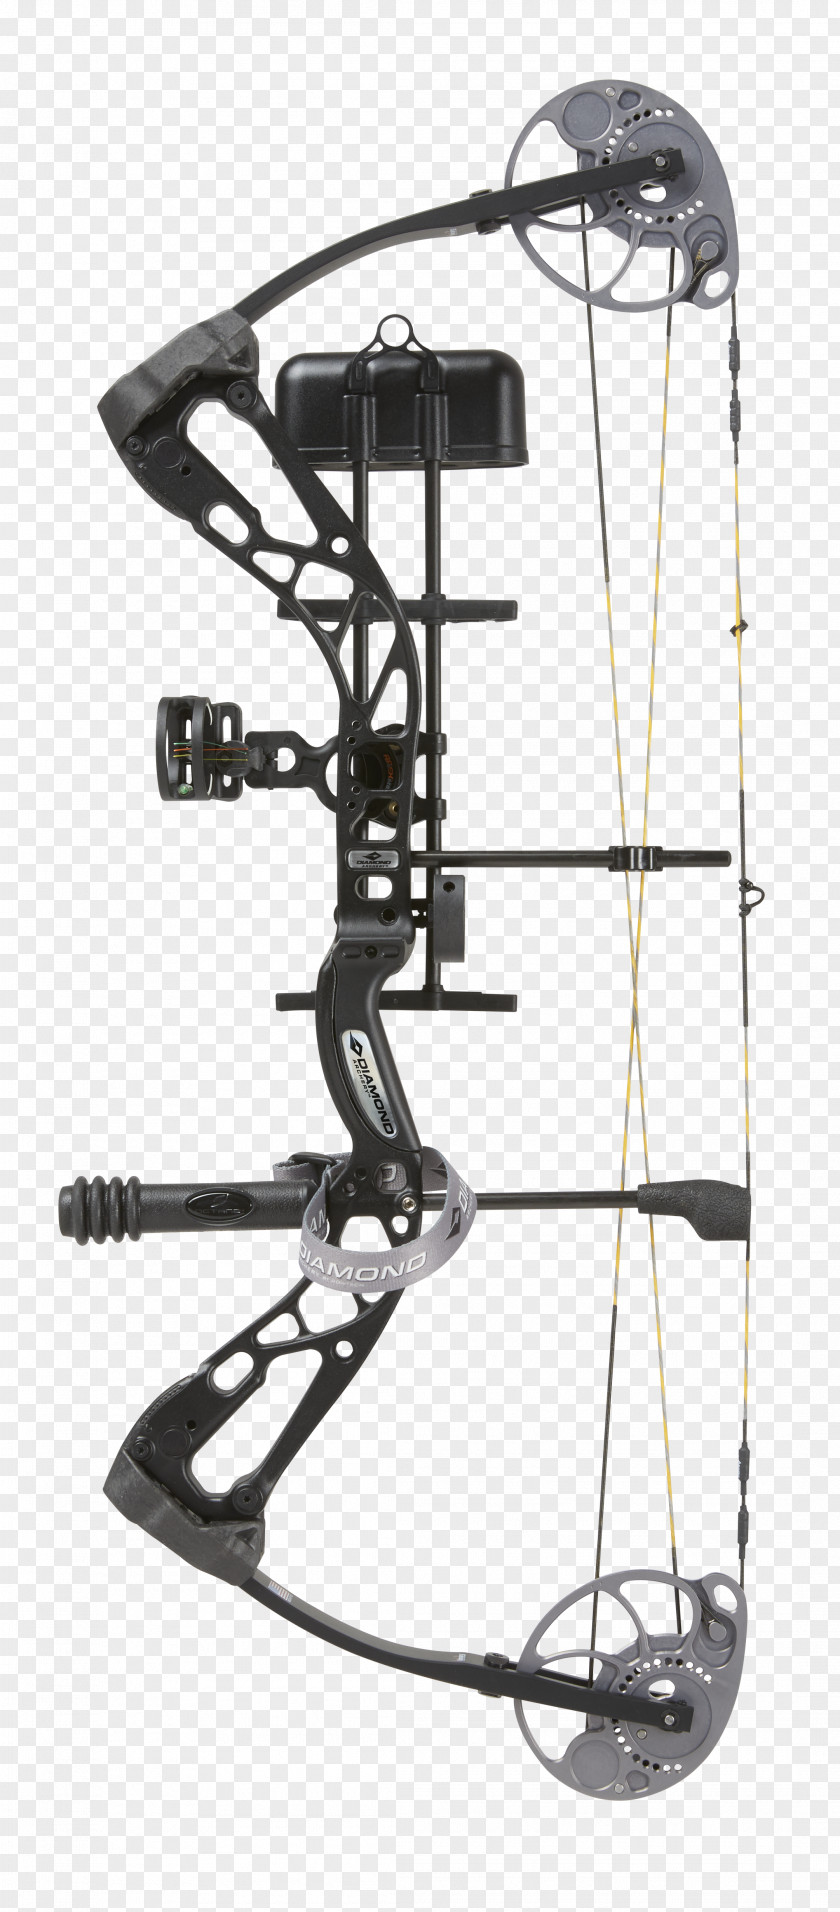 Archery Compound Bows Bow And Arrow Binary Cam Diamond PNG